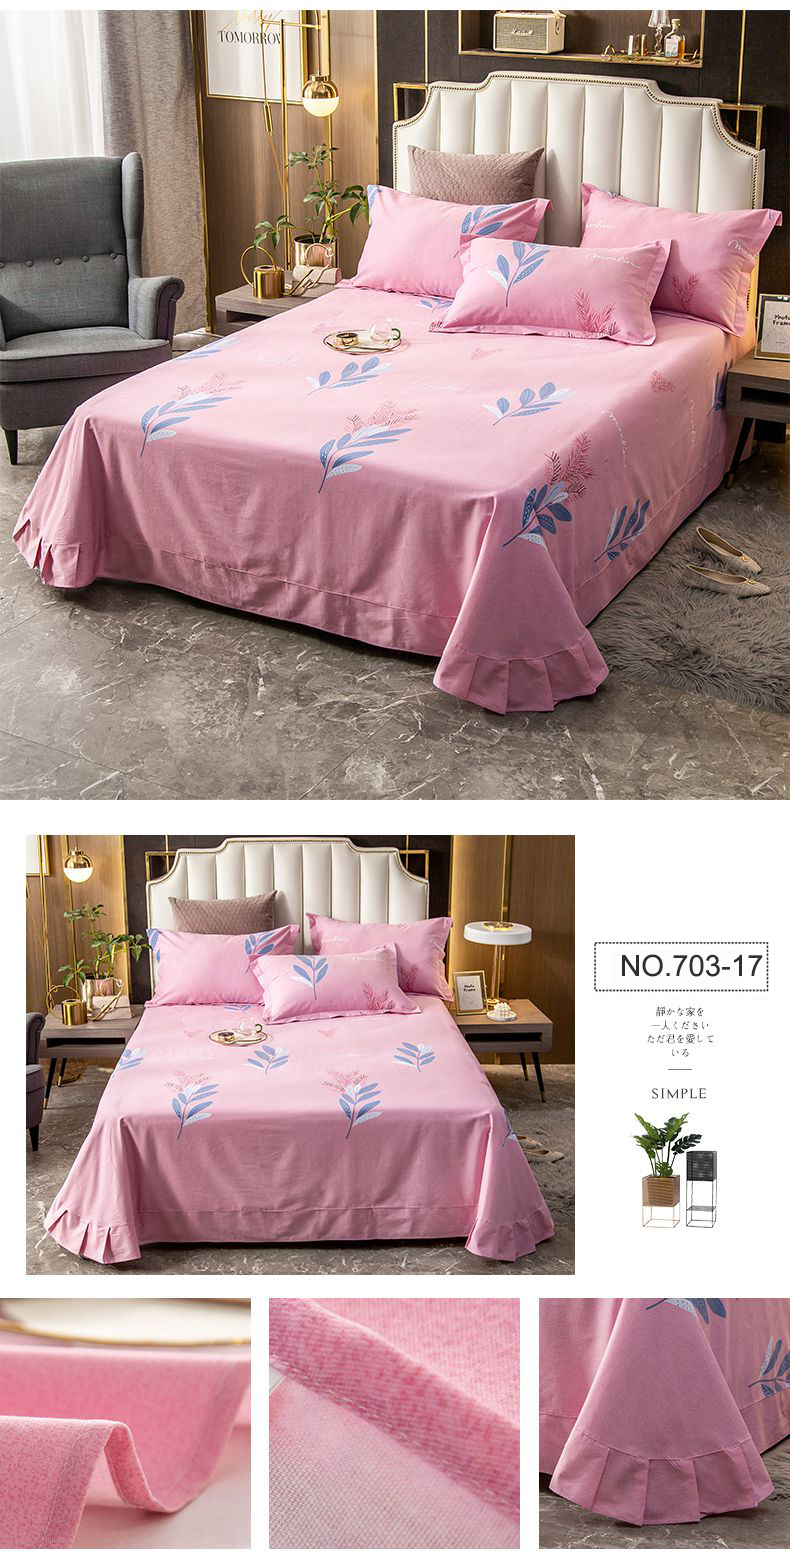 New Product Hypoallergenic Sheet Set